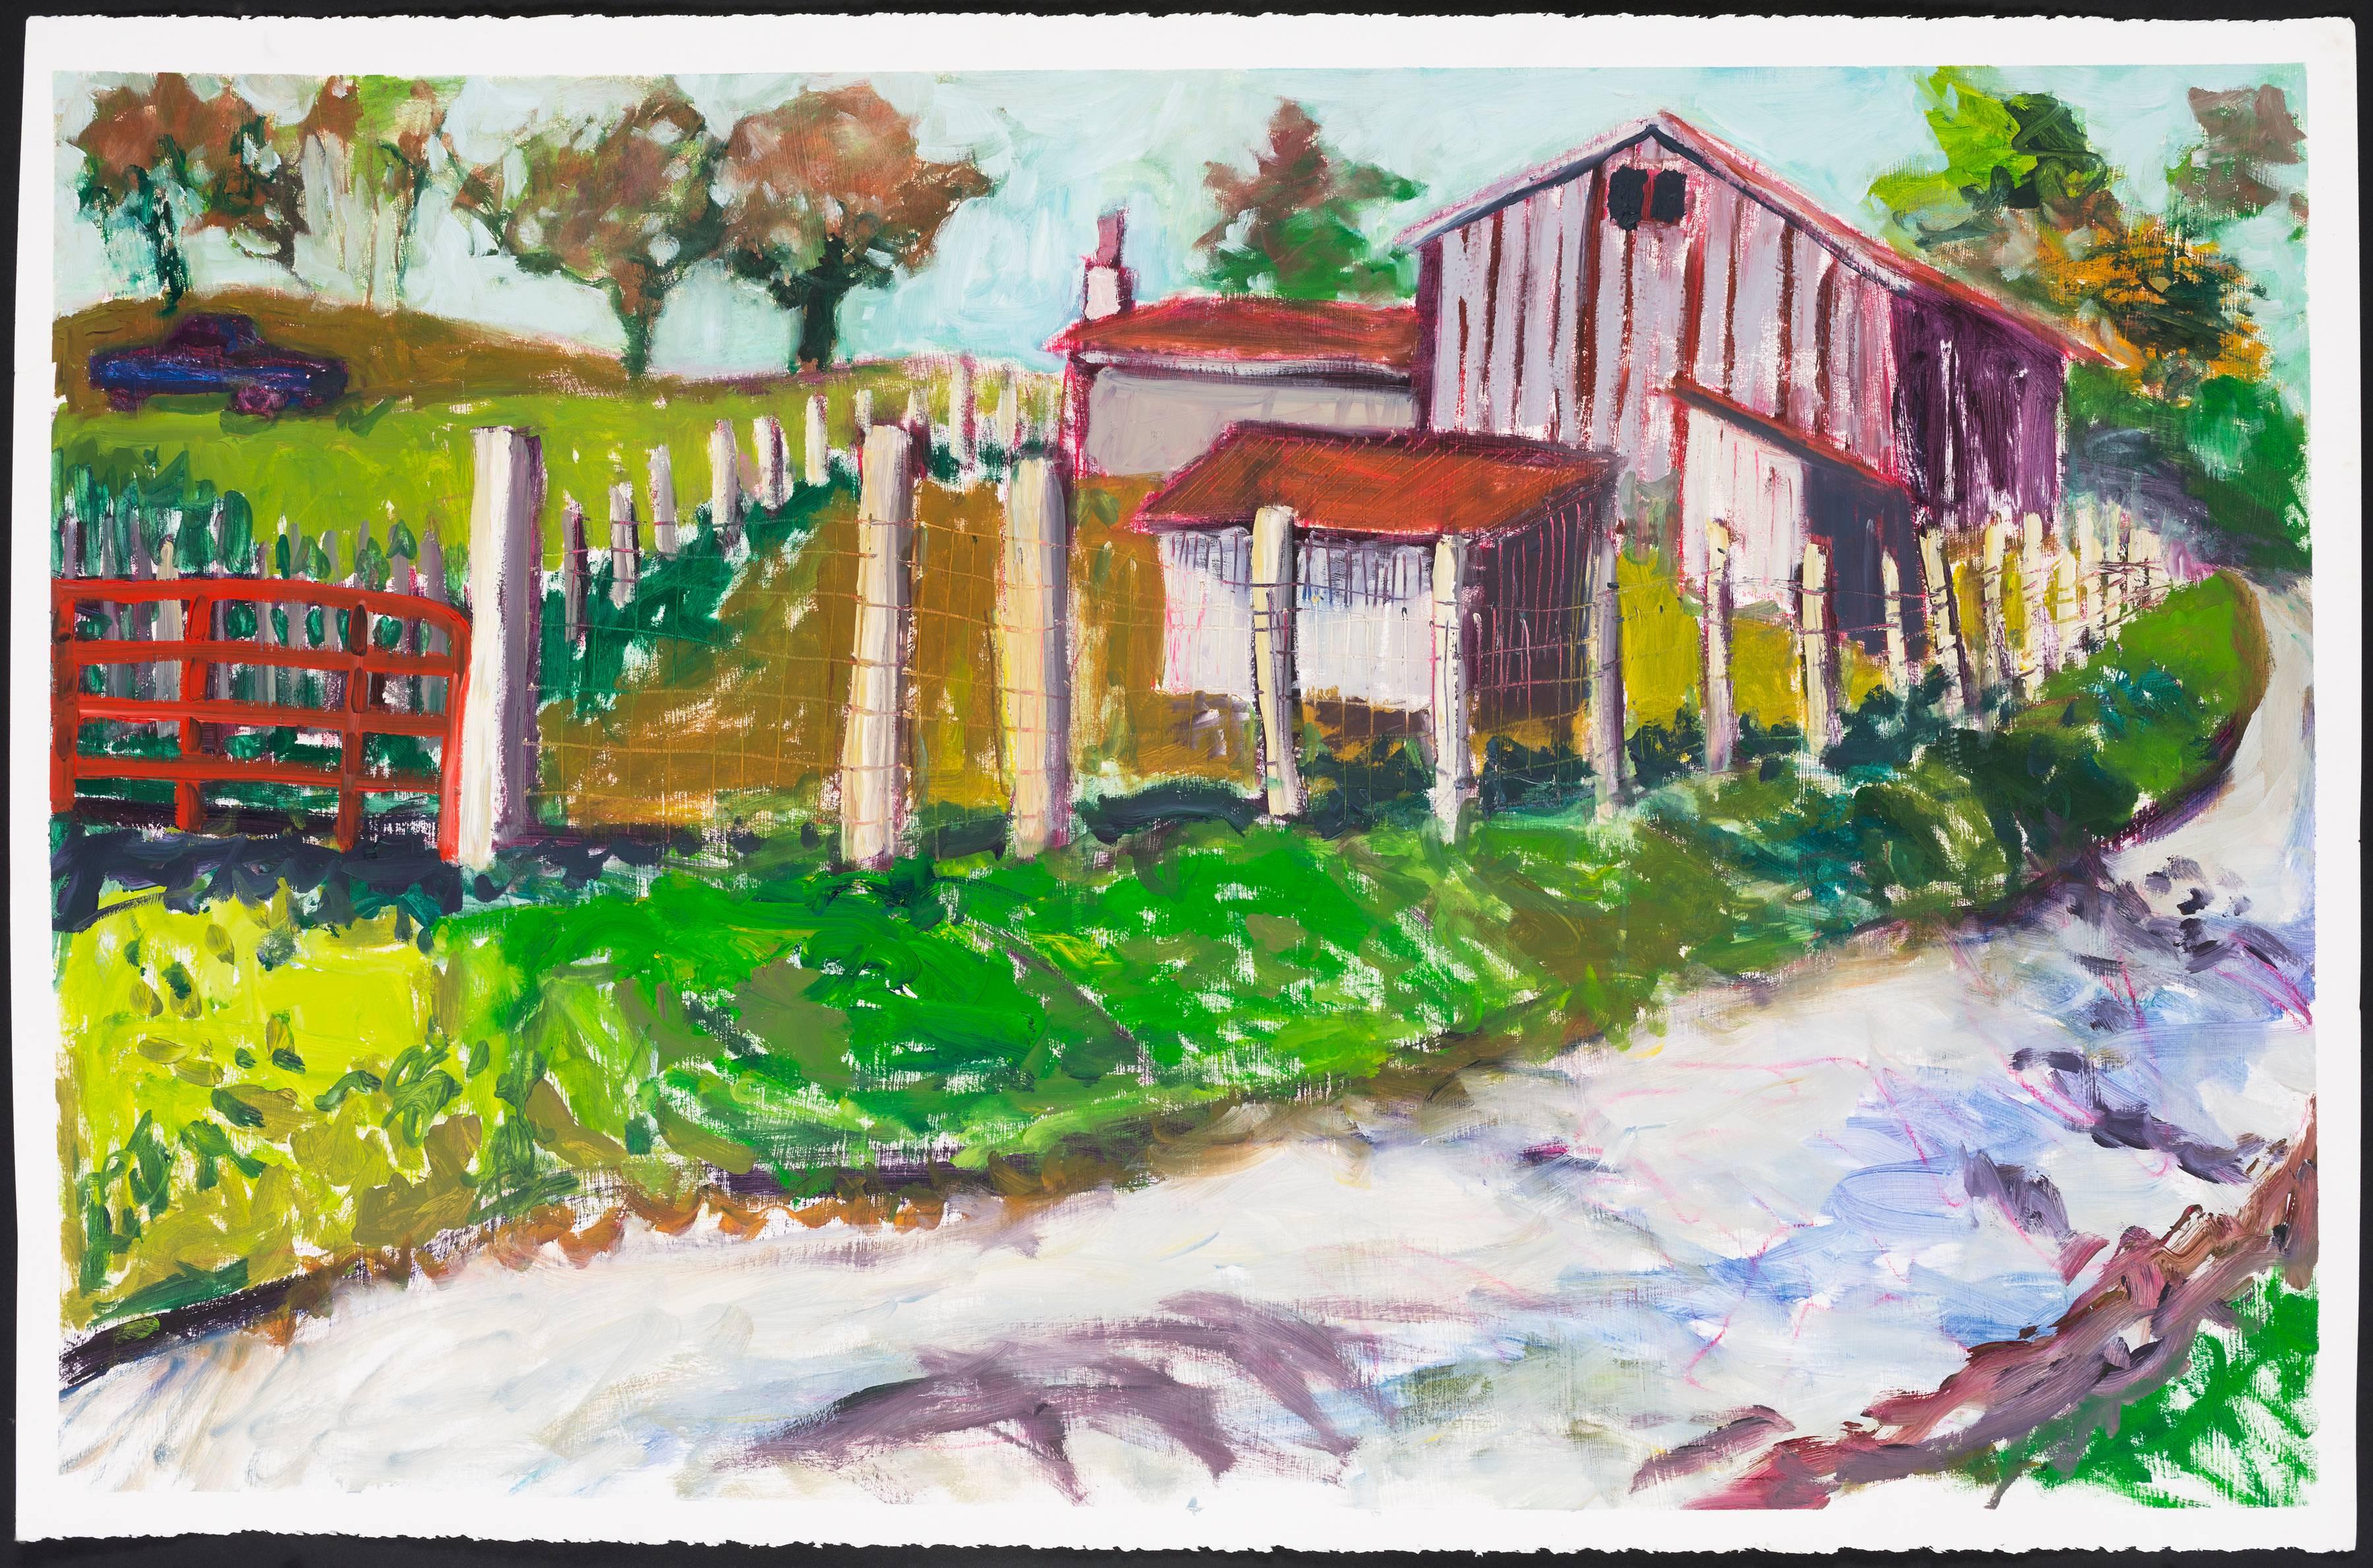 Gina Phillips Landscape Painting - Silver Creek Road, October 18, 2017